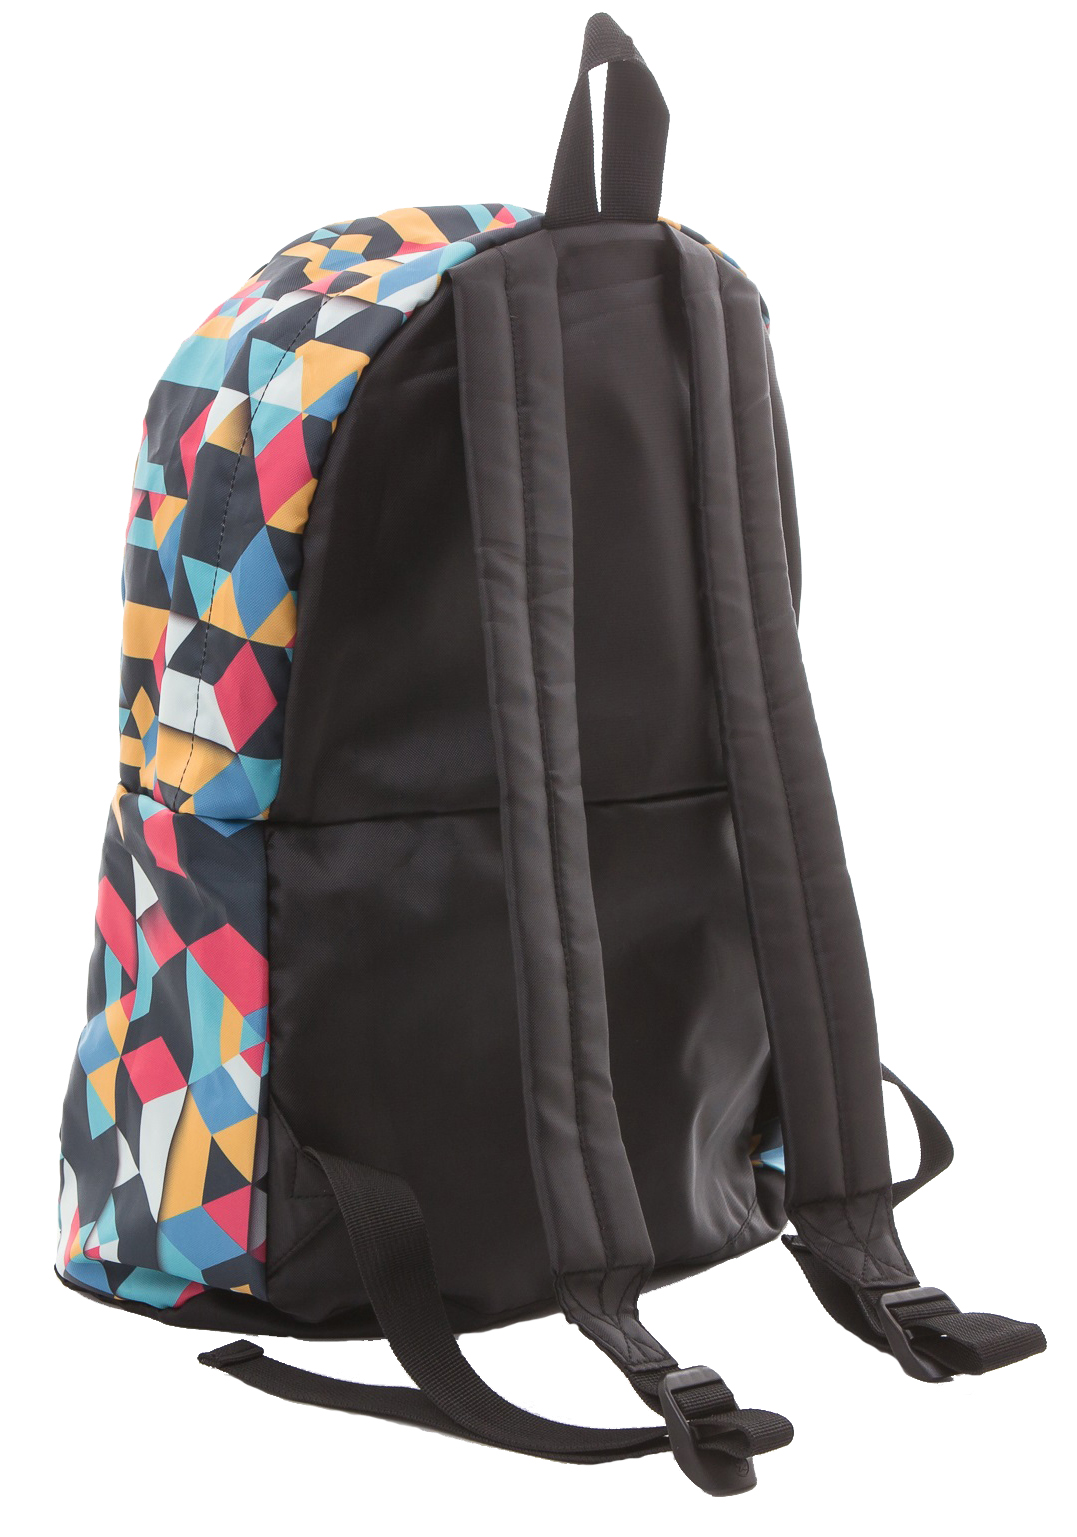 K-Cliffs 2-In-1 Combination Unisex Polyester Reversible 16 inch School Backpack Convertible Tote Bag Day Pack, Black All Ages - image 3 of 3